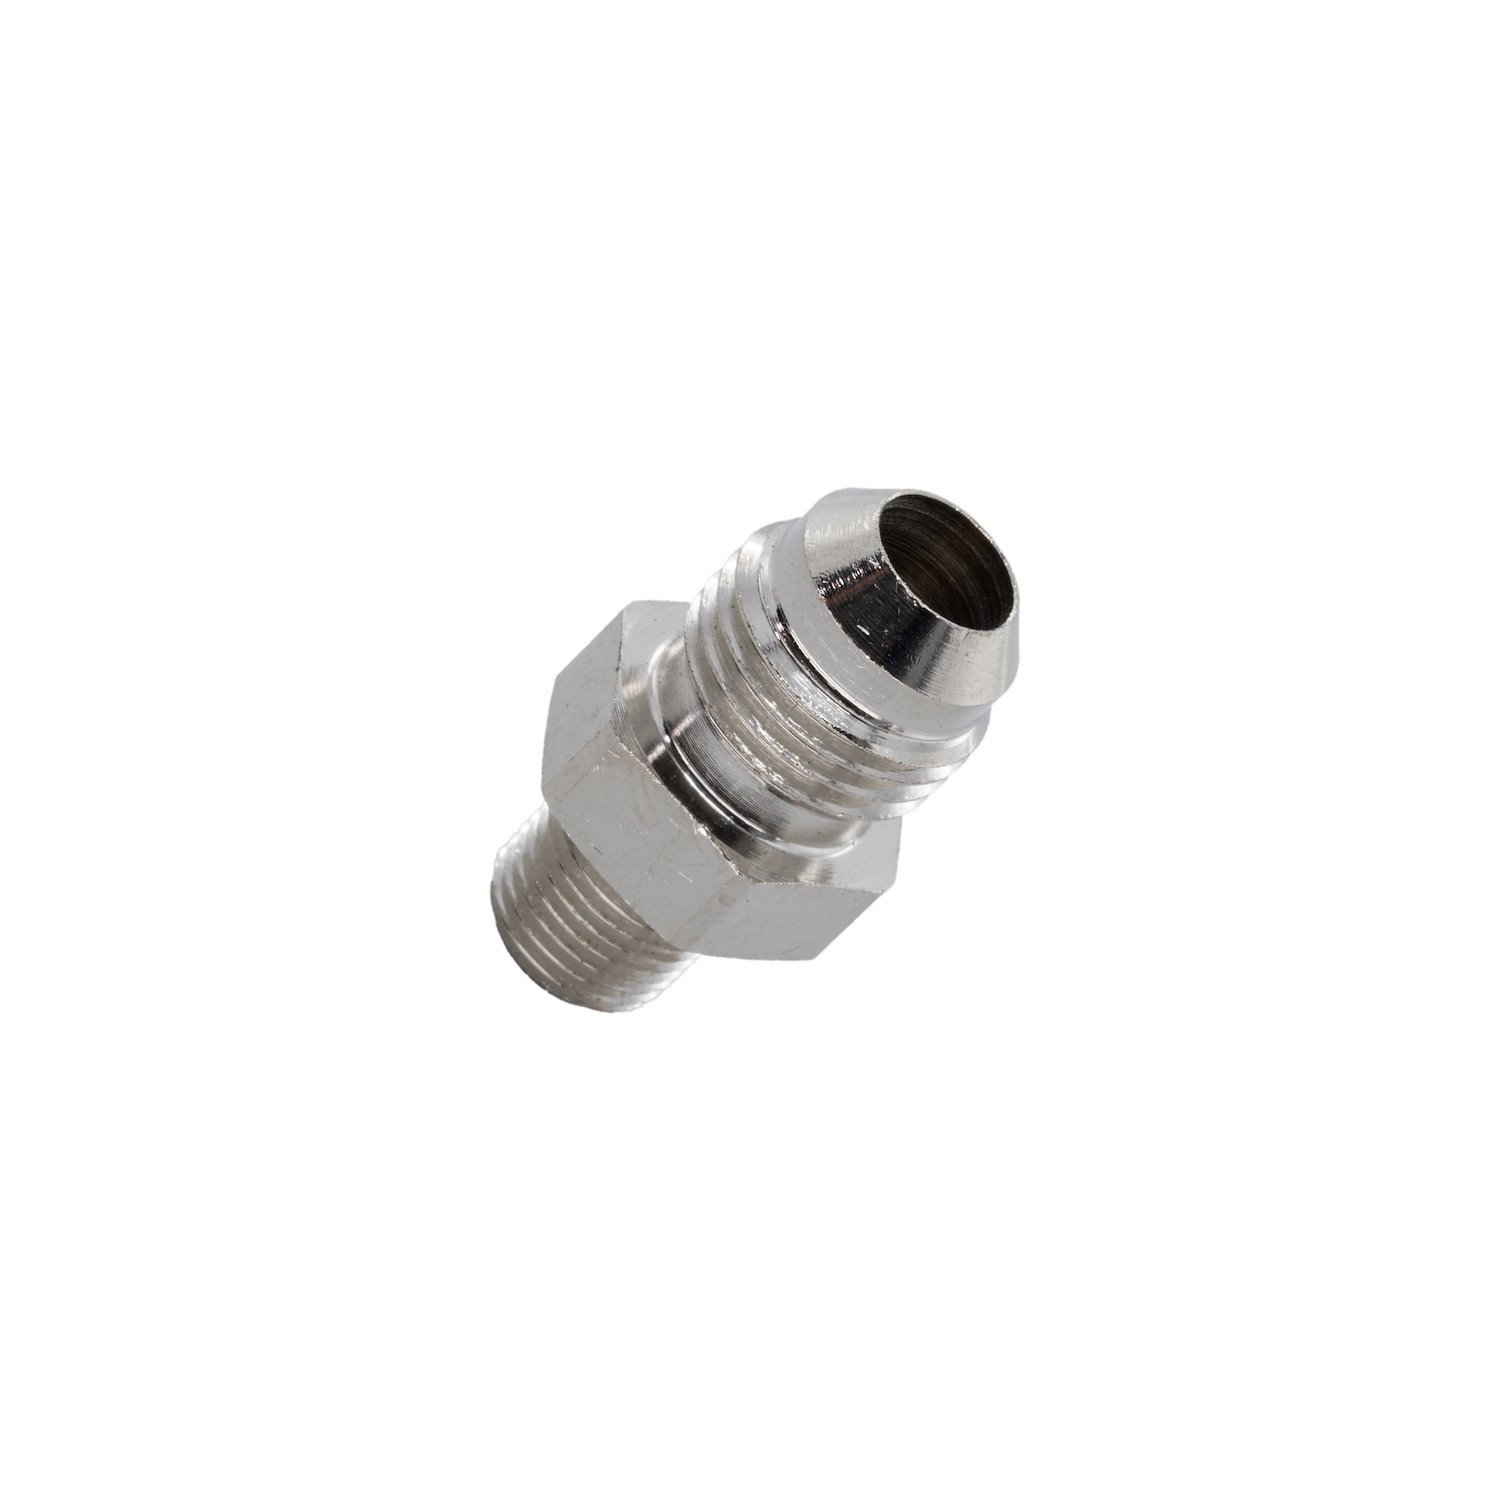 00-01153-B 1/8 in. NPT x 6AN Straight Fitting, Male/Male